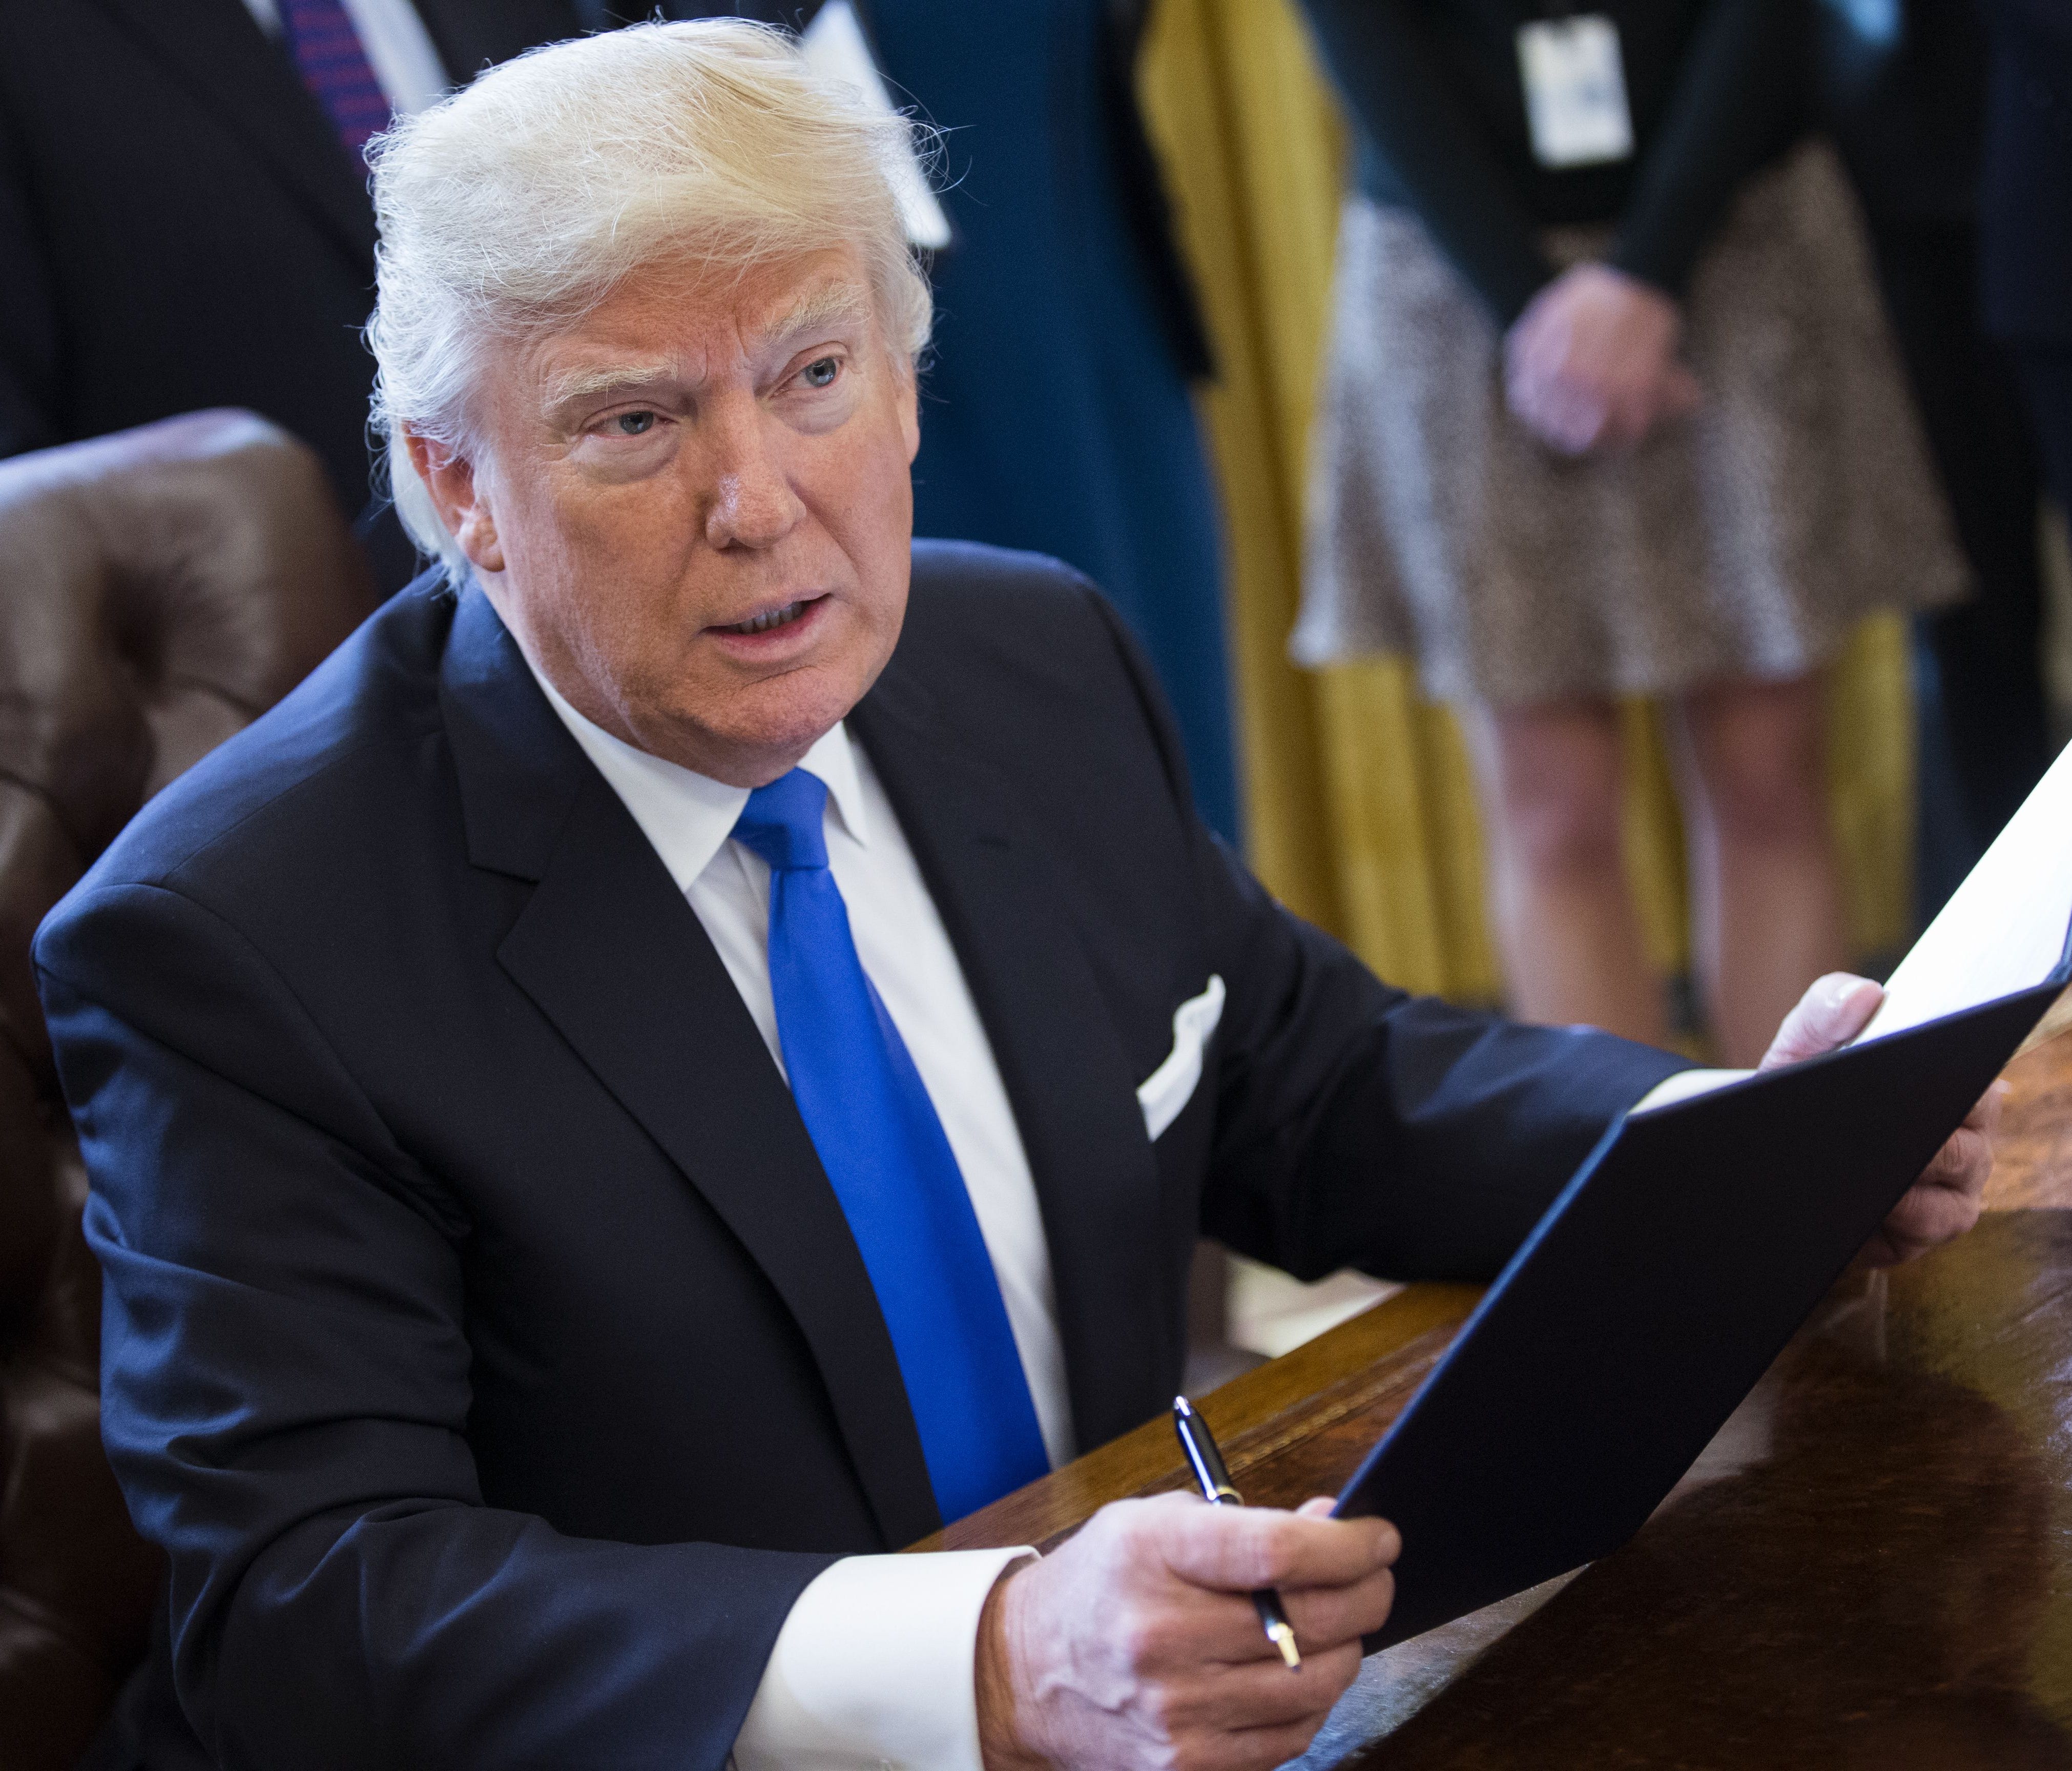 President Trump will begin rolling out executive actions on immigration Wednesday.